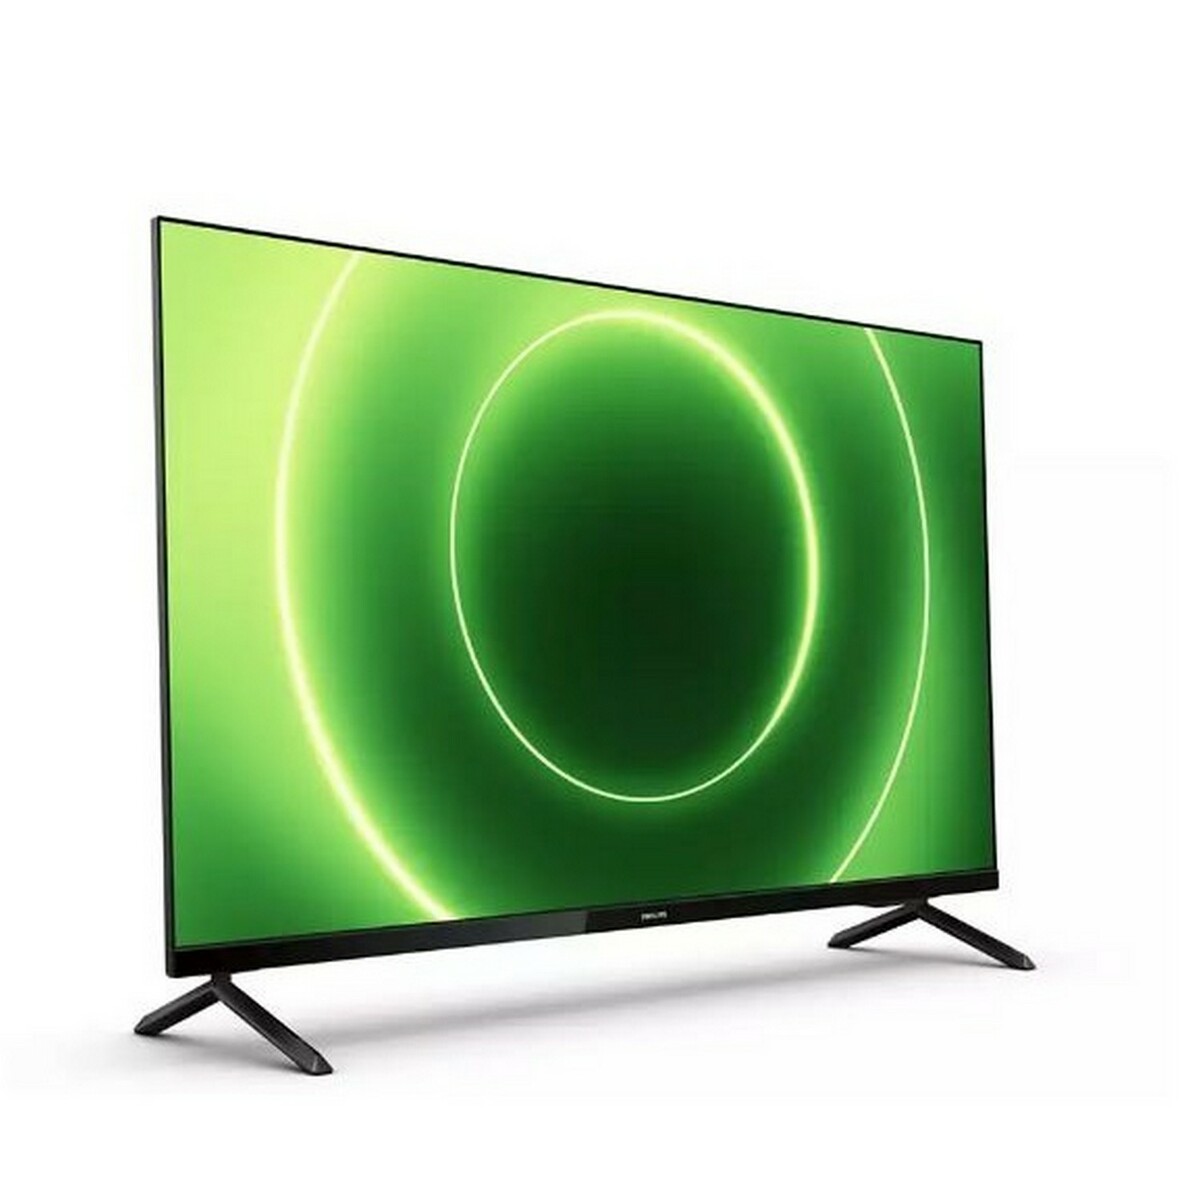 Philips Full HD LED TV Android Smart 43PFT6915 43